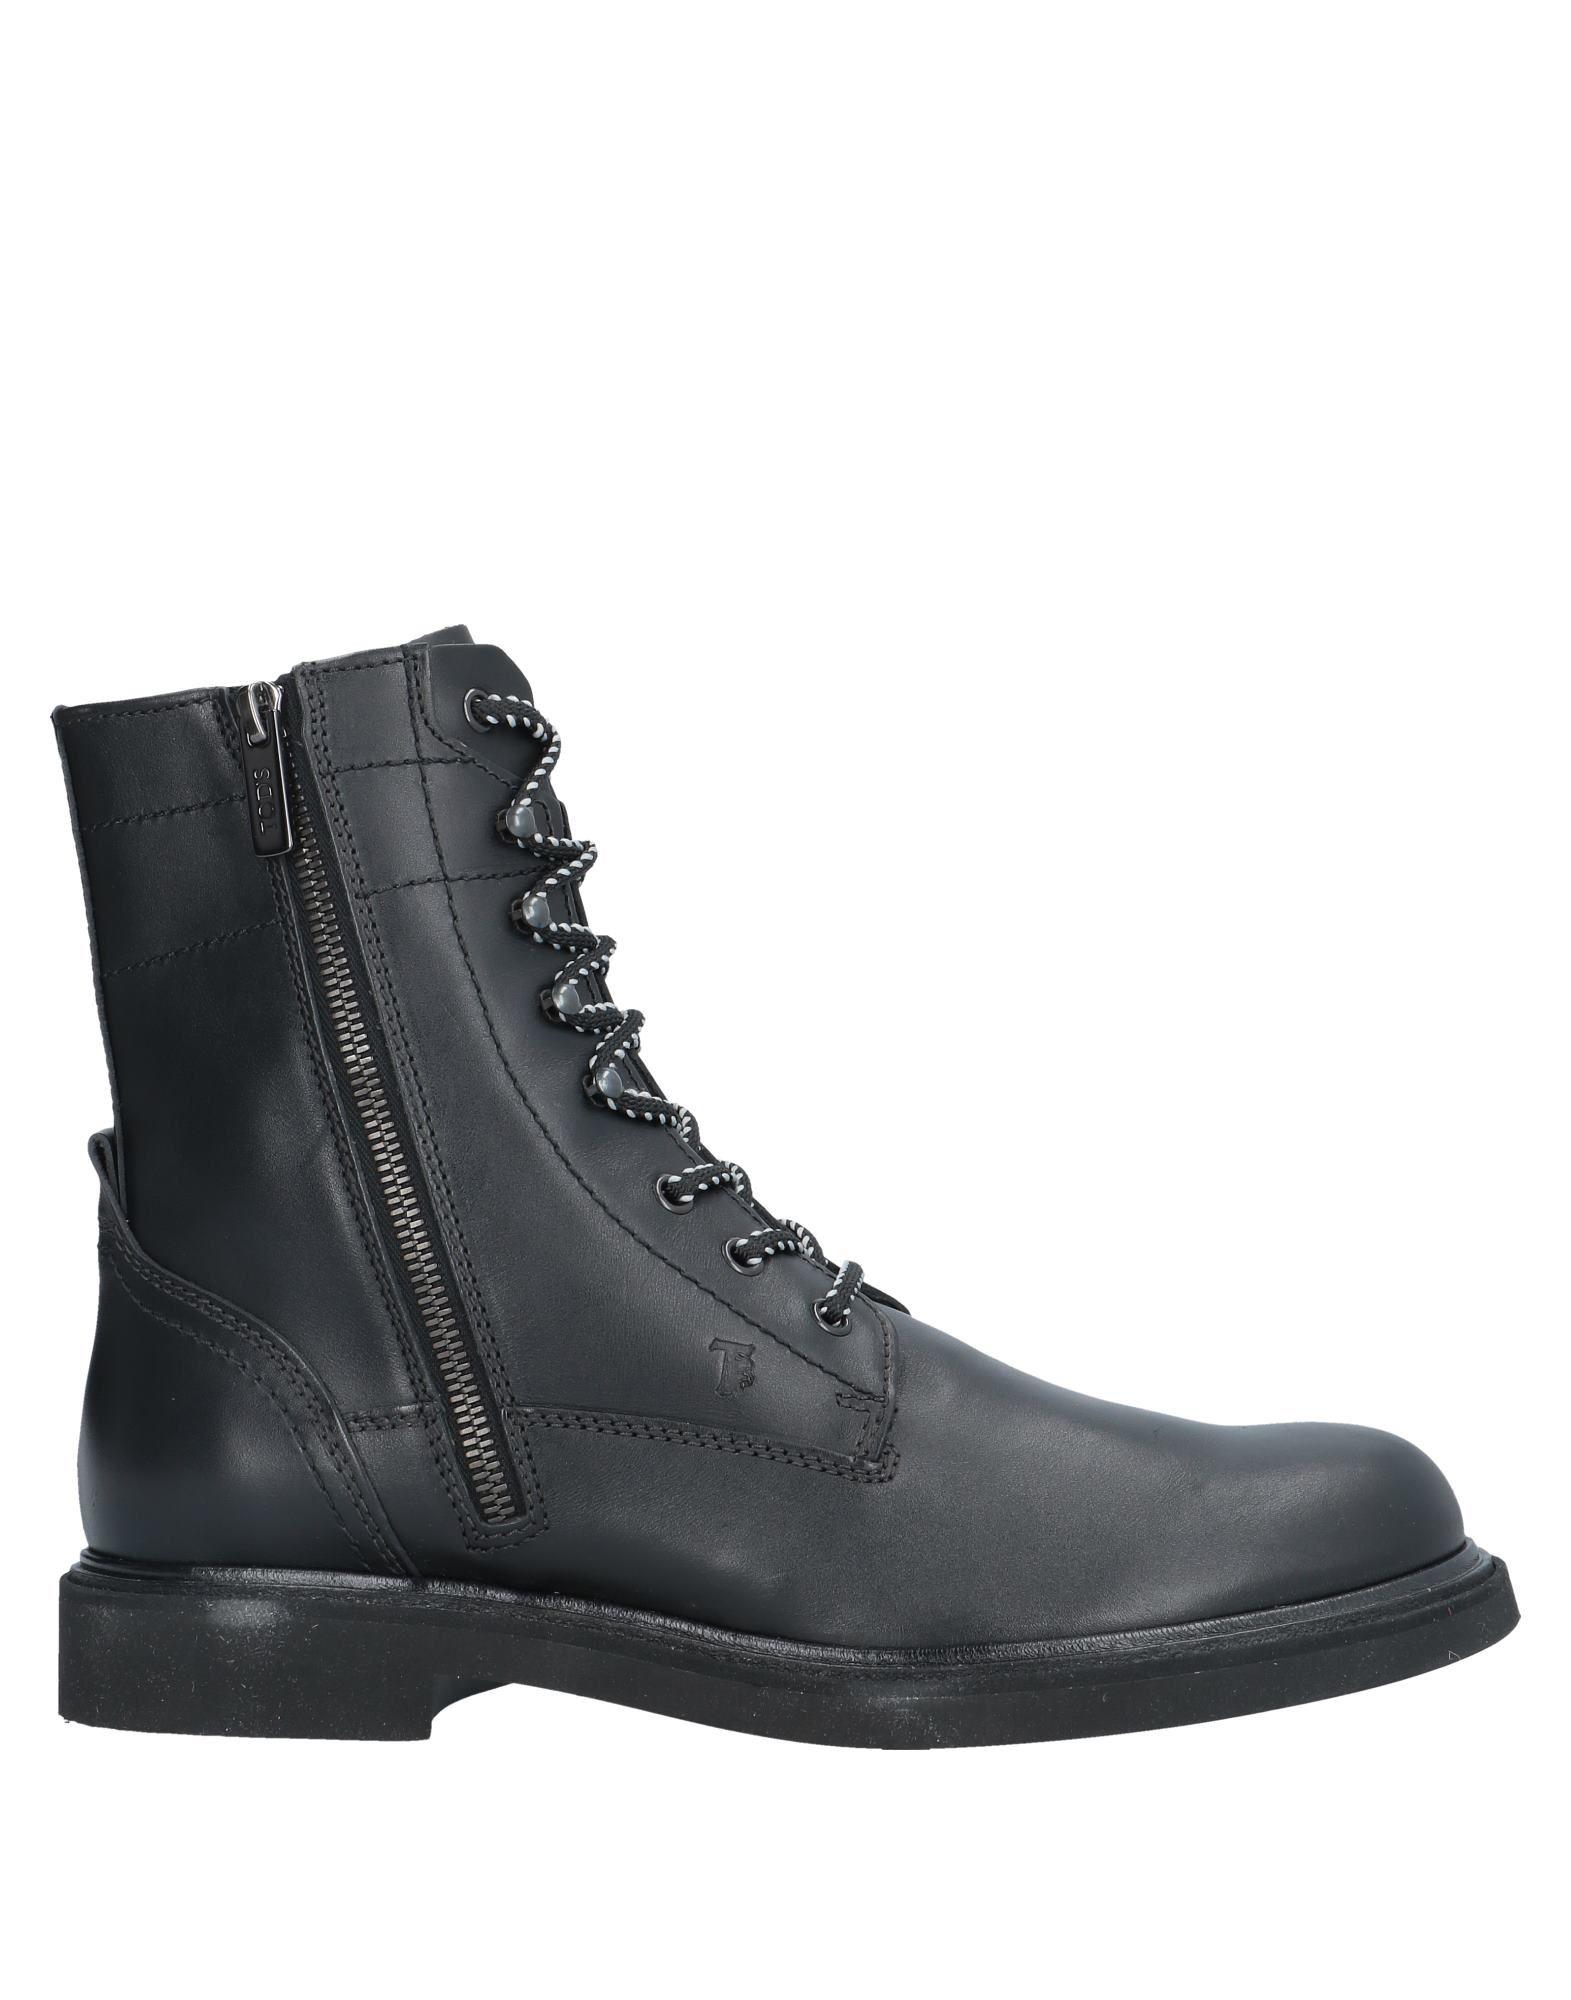 Tod's Ankle Boots in Black for Men - Lyst